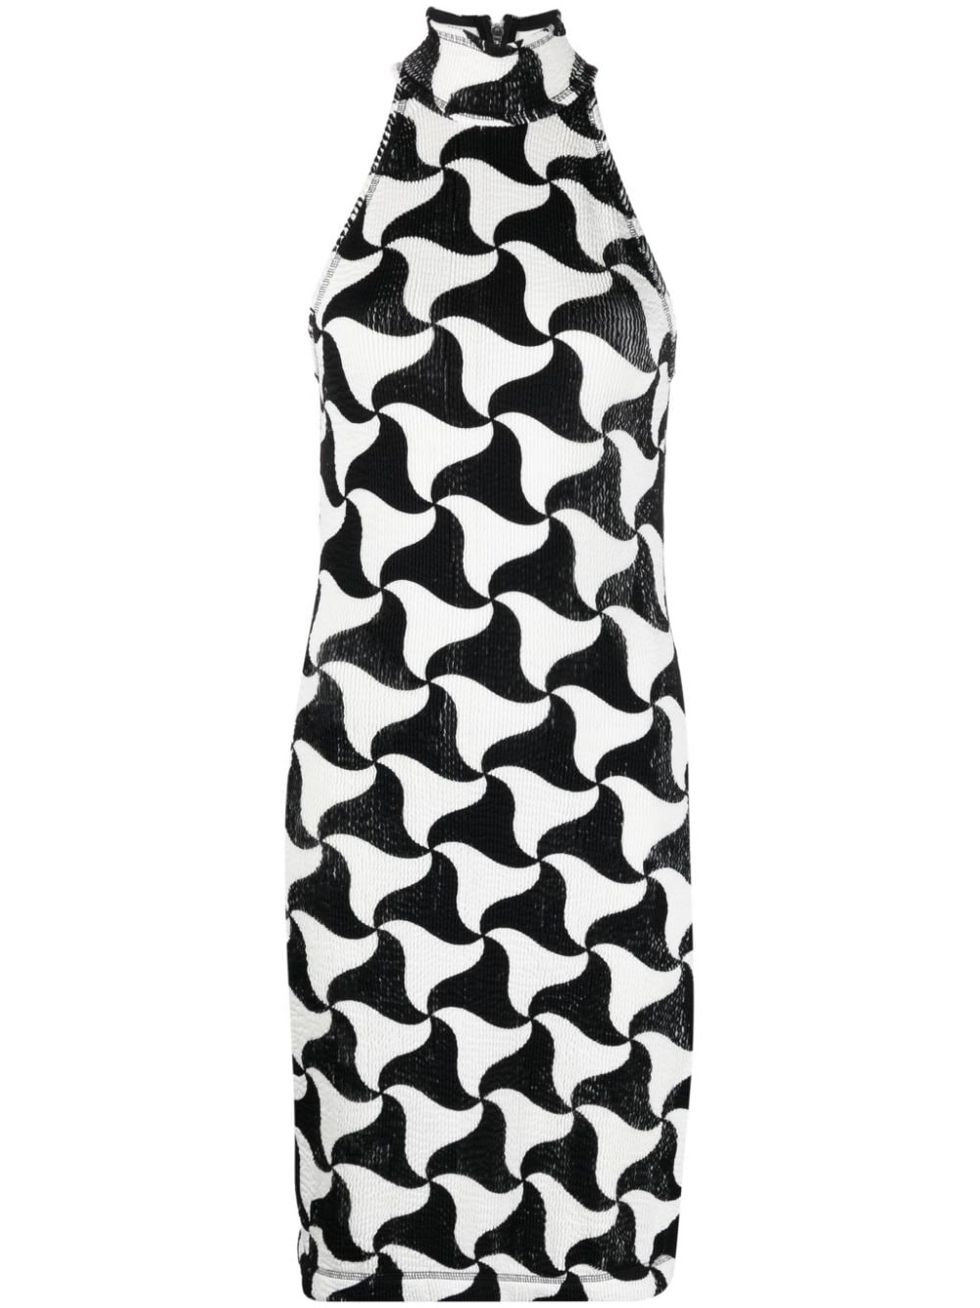 Abstract Triangle Elasticated Dress